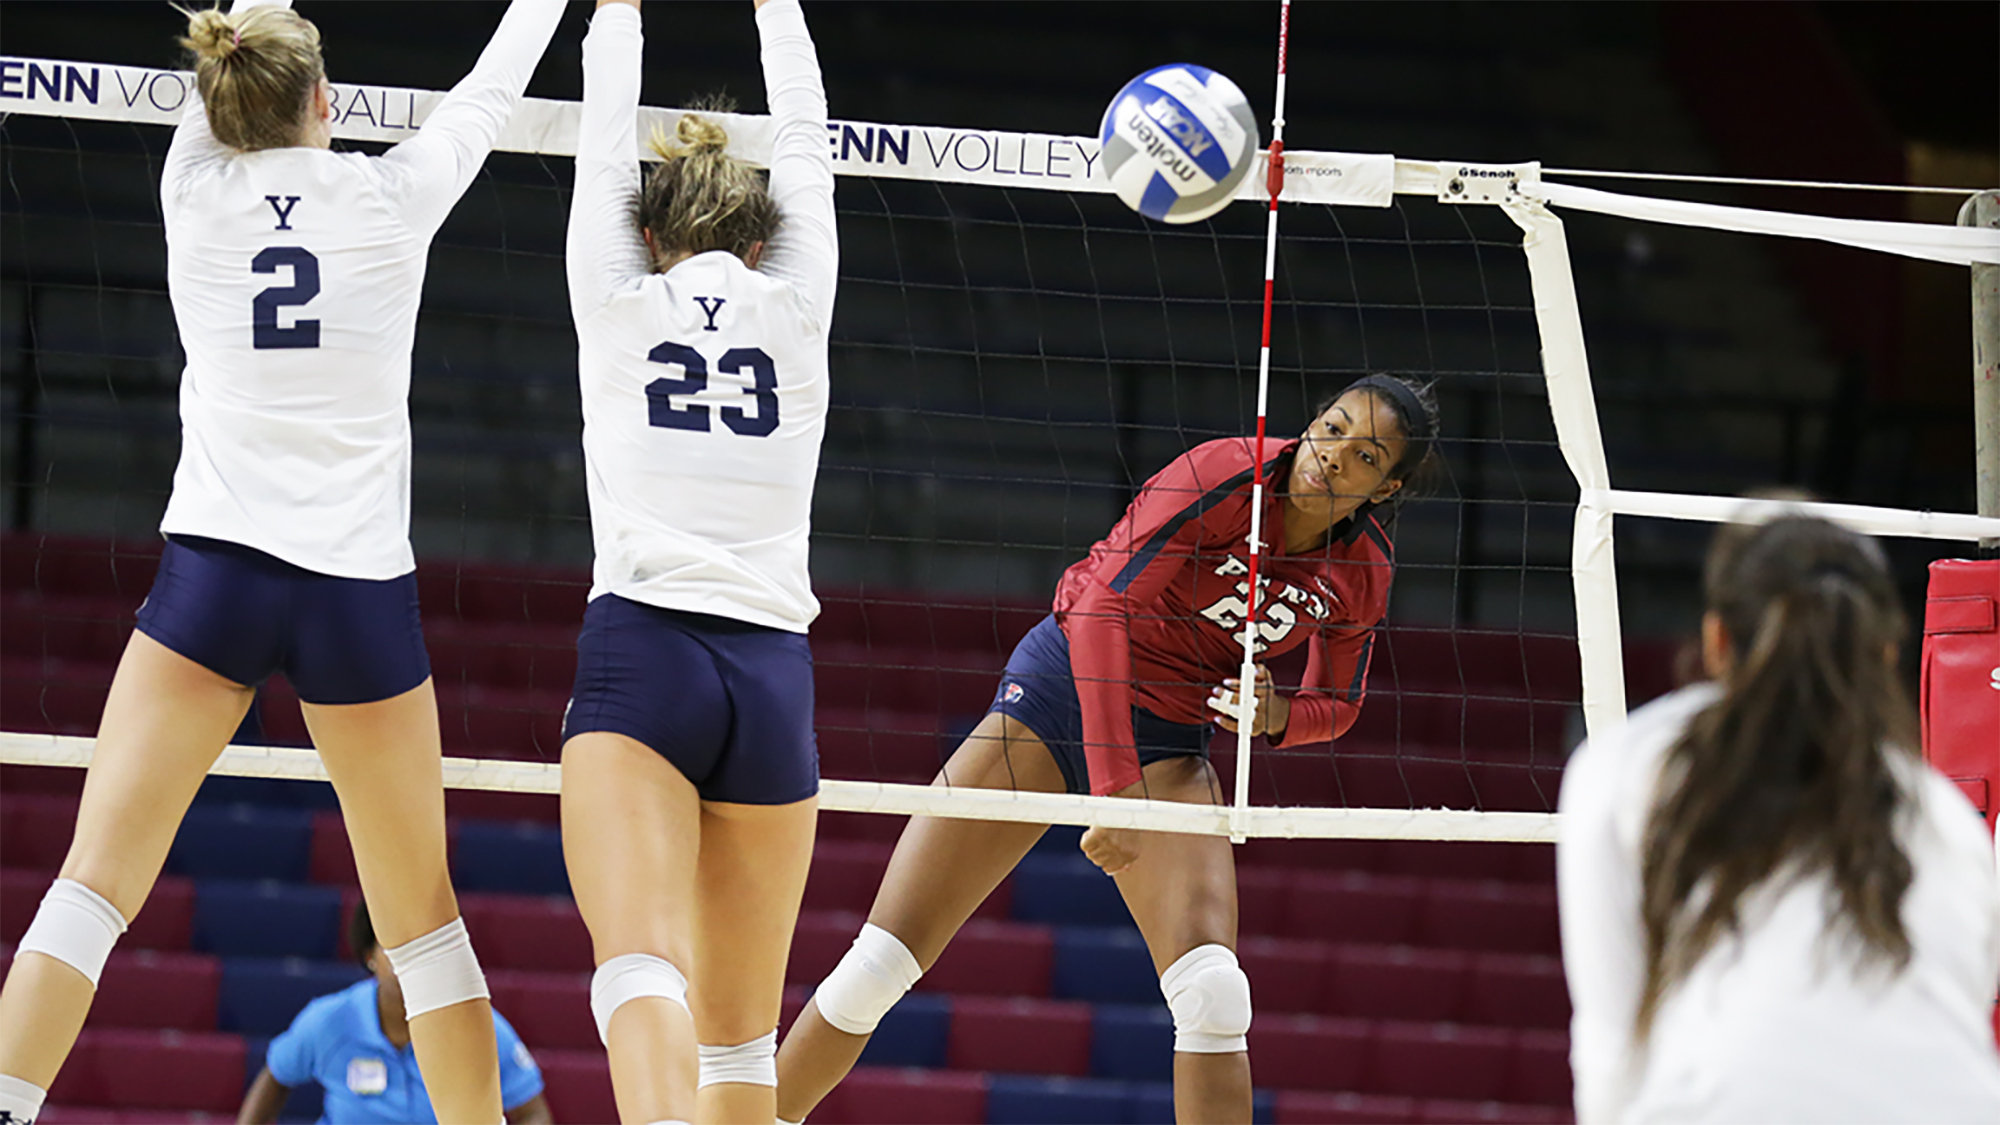 Freshman Autumn Leak serves the ball against Yale at the Palestra.